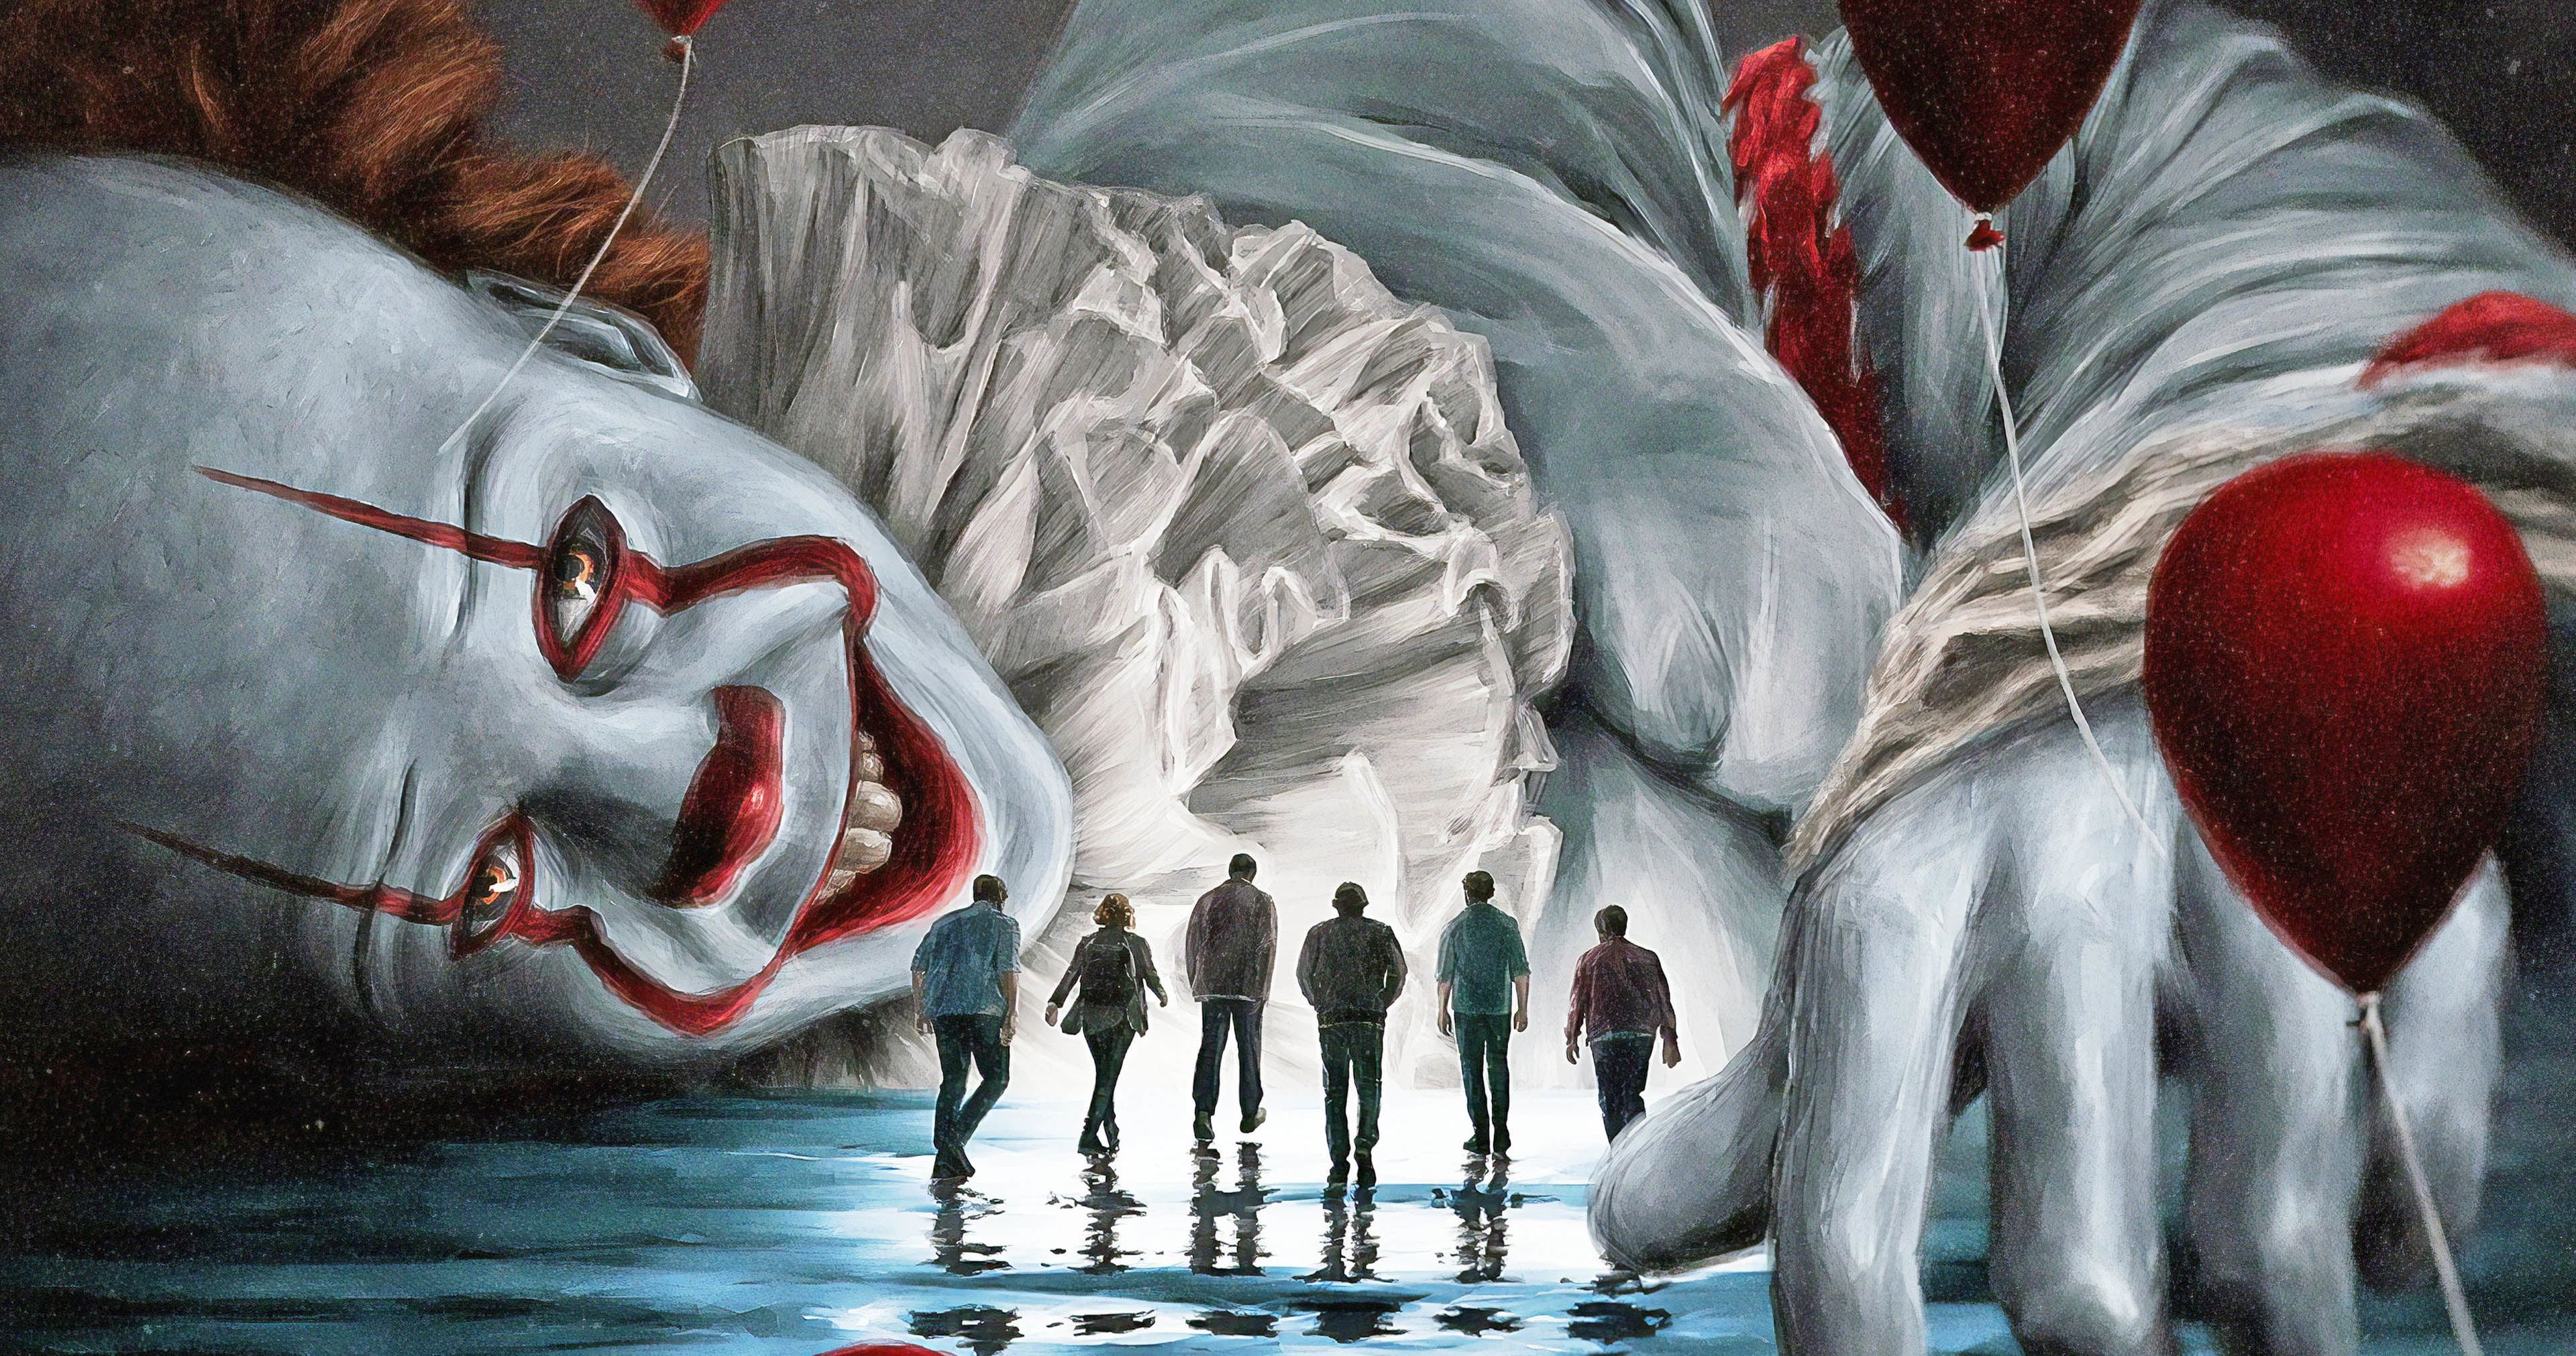 IT Chapter Two Director Says There Could Be Another Movie, There's Enough Mythology